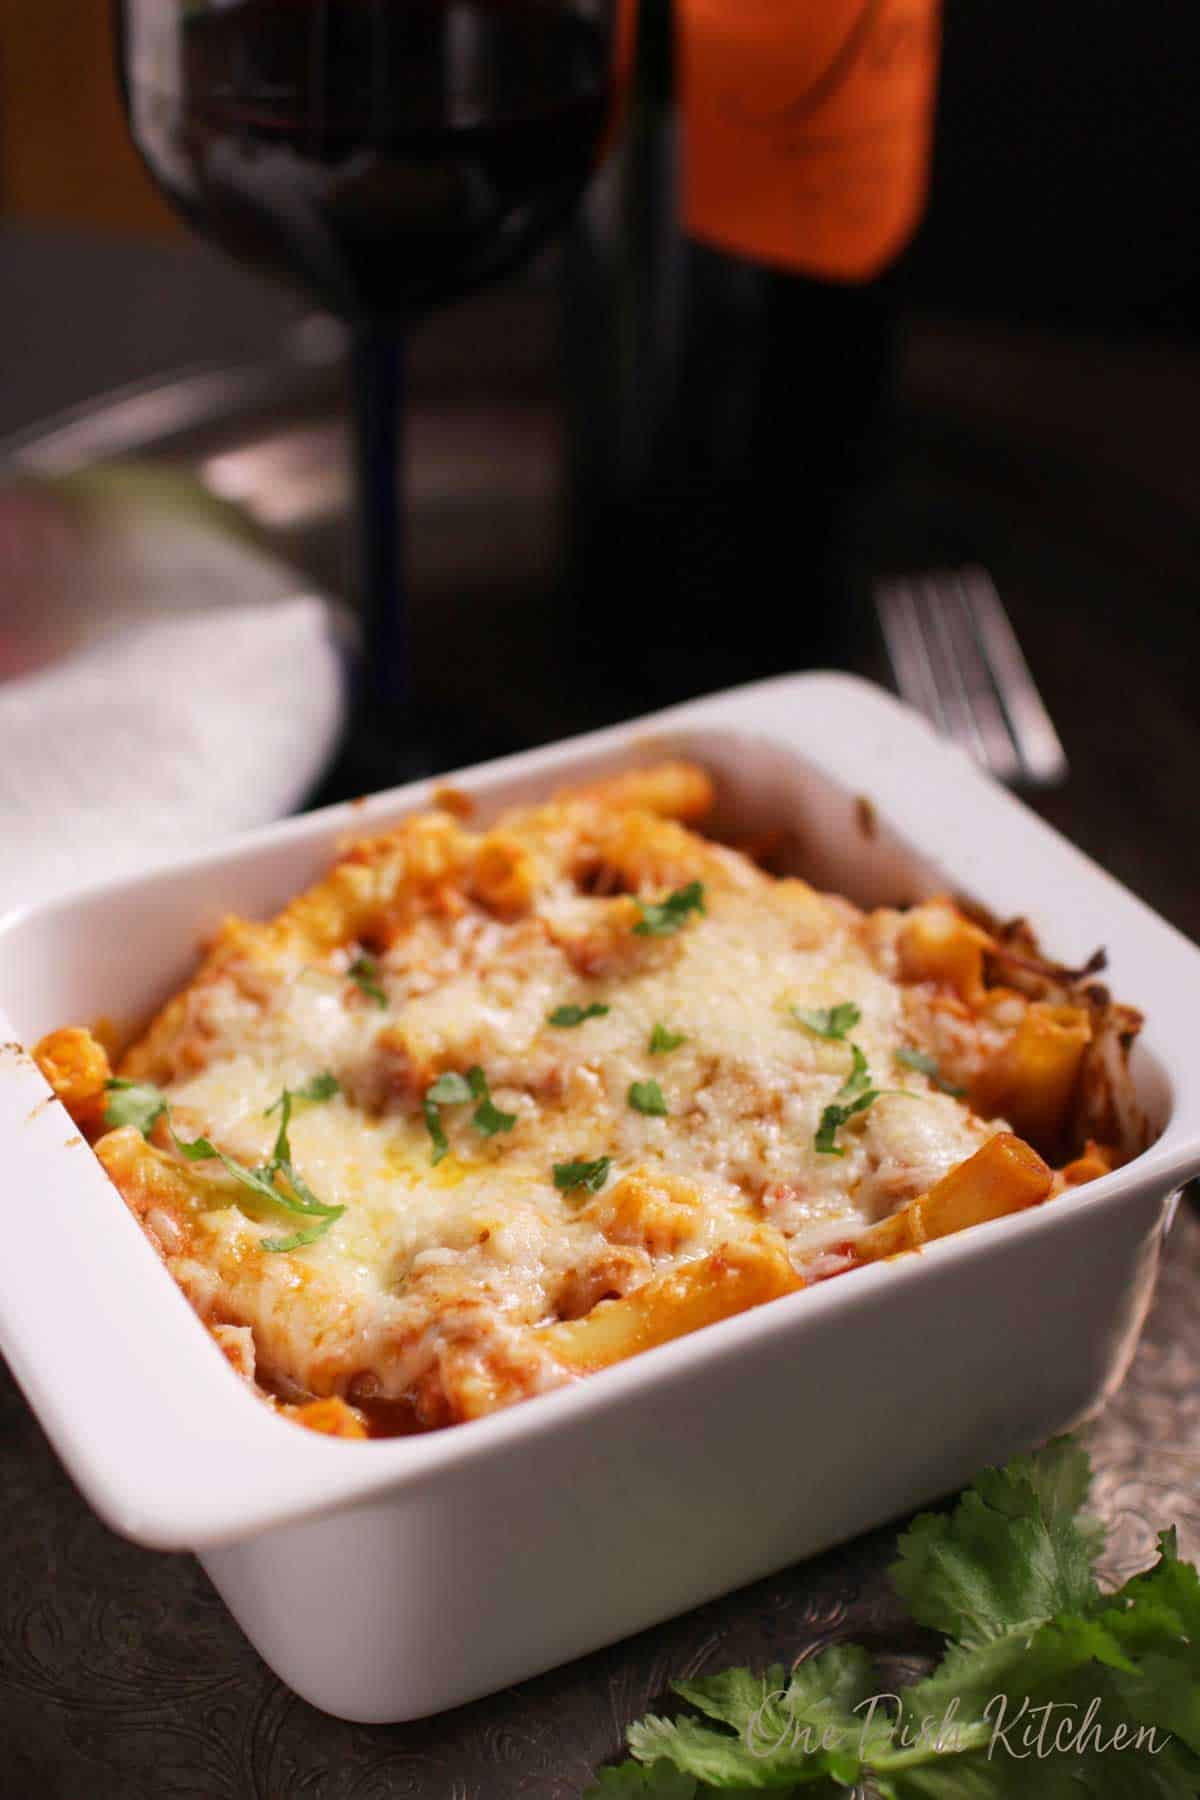 Baked ziti topped with melted mozzarella cheese in a small baking dish garnished with parsley on a metal tray with a glass and a bottle of red wine.